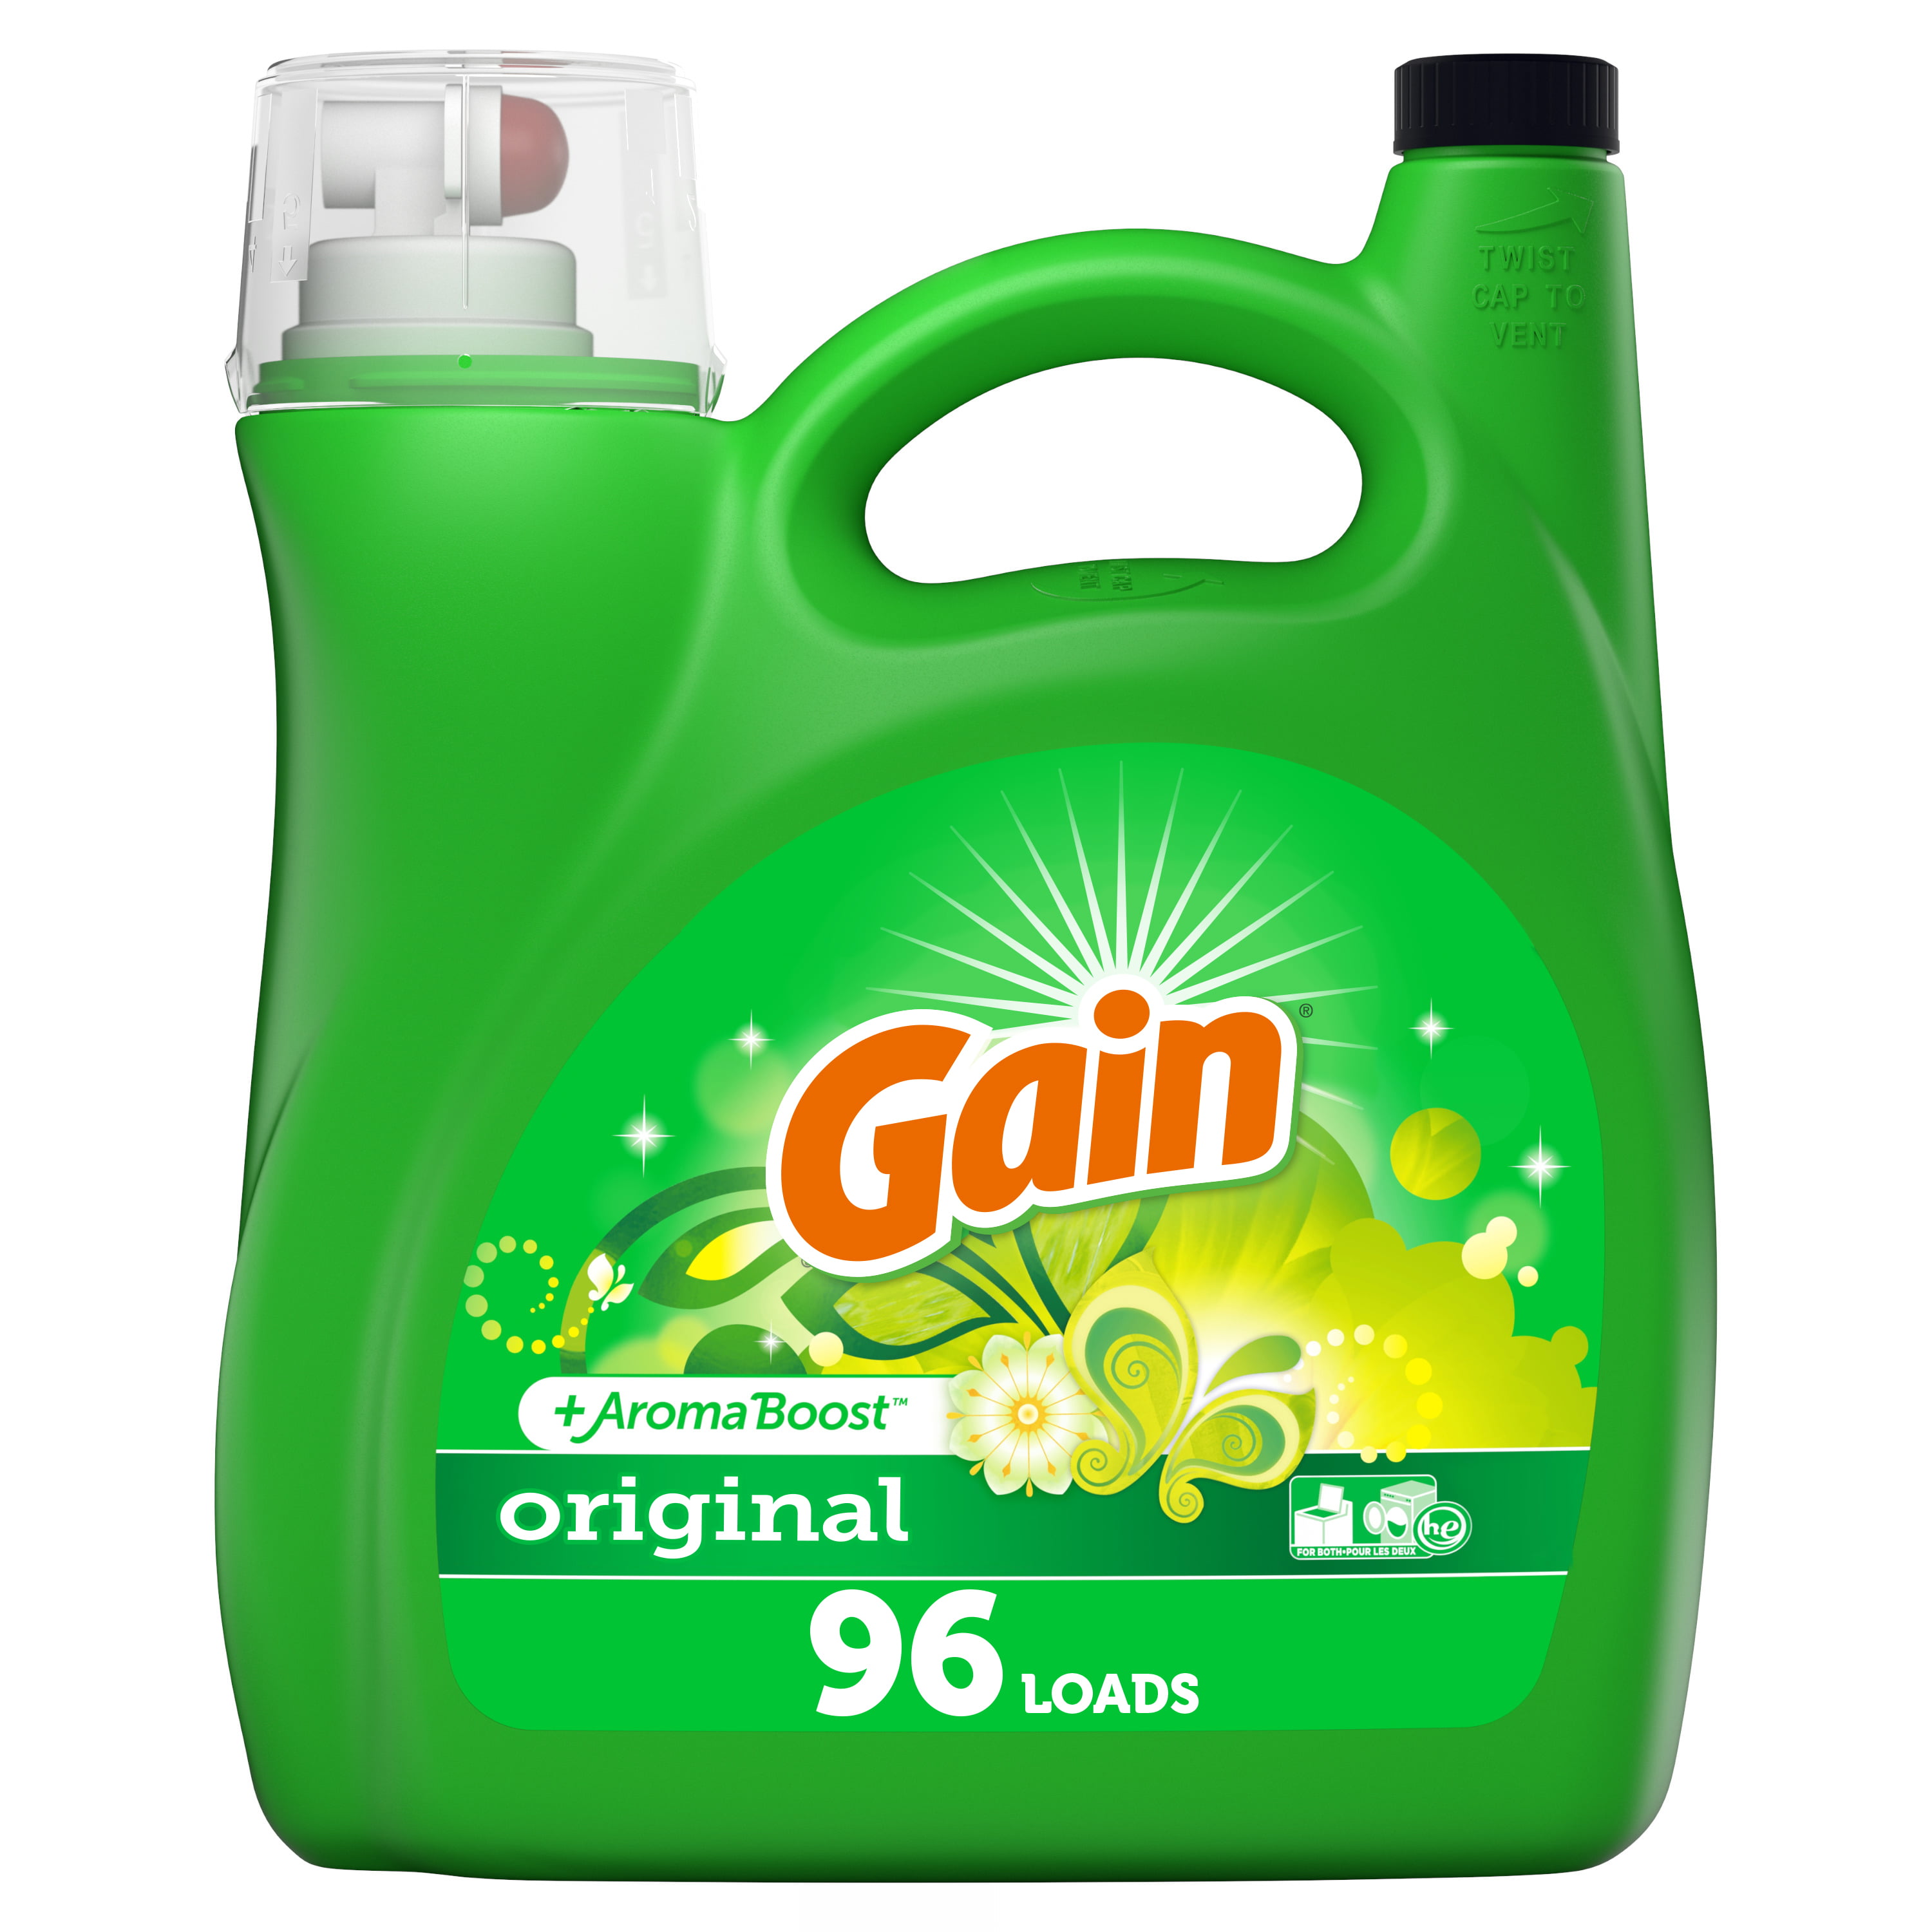 detergent soap for sale